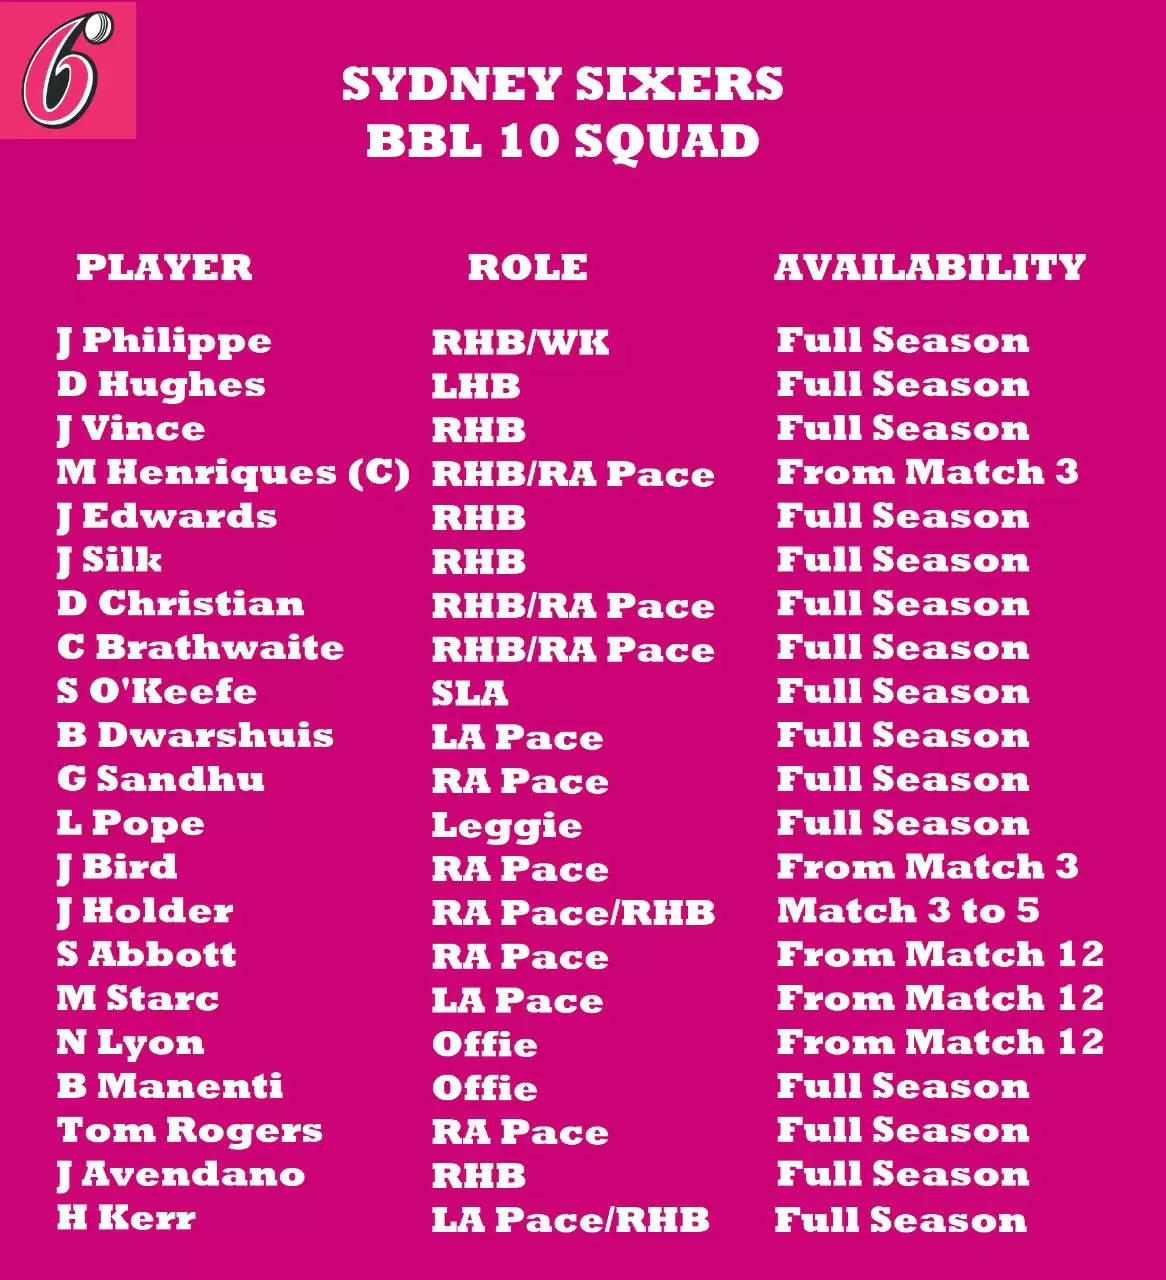 Sydney Sixers Team Preview, Squad and Fantasy Cheat Sheet for Big Bash League 2020-21 season